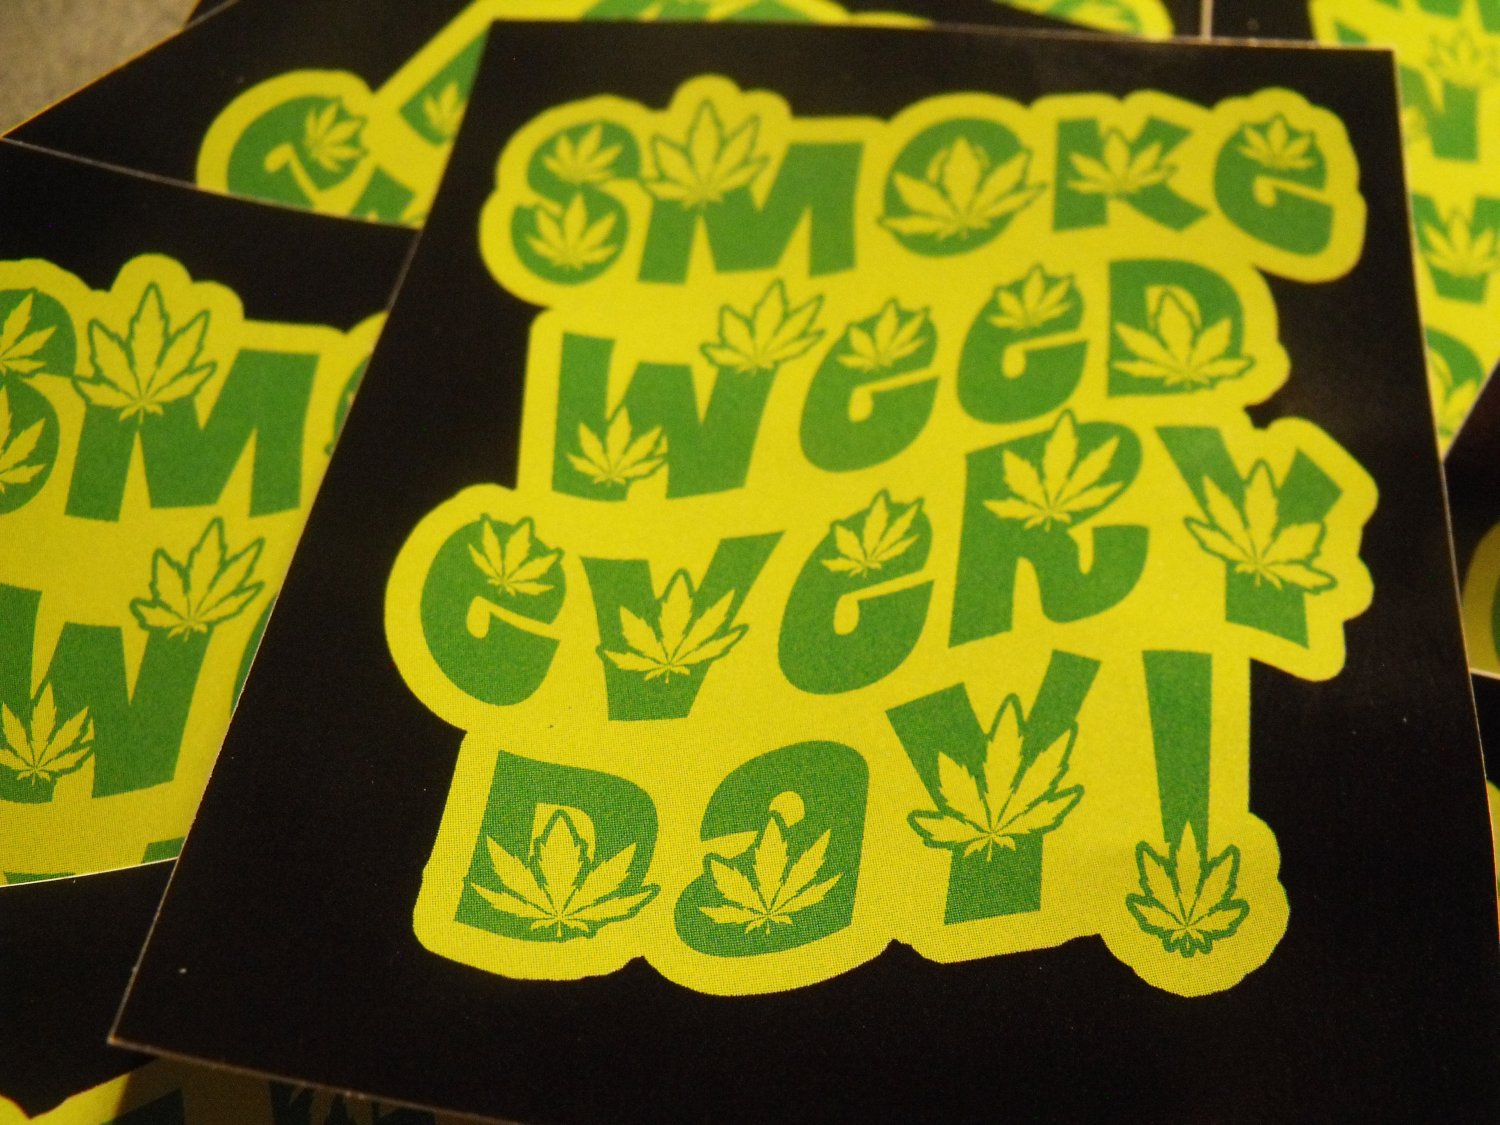 25 SMoKE WEED EVERY DAY!  3" x 2.5" stickers